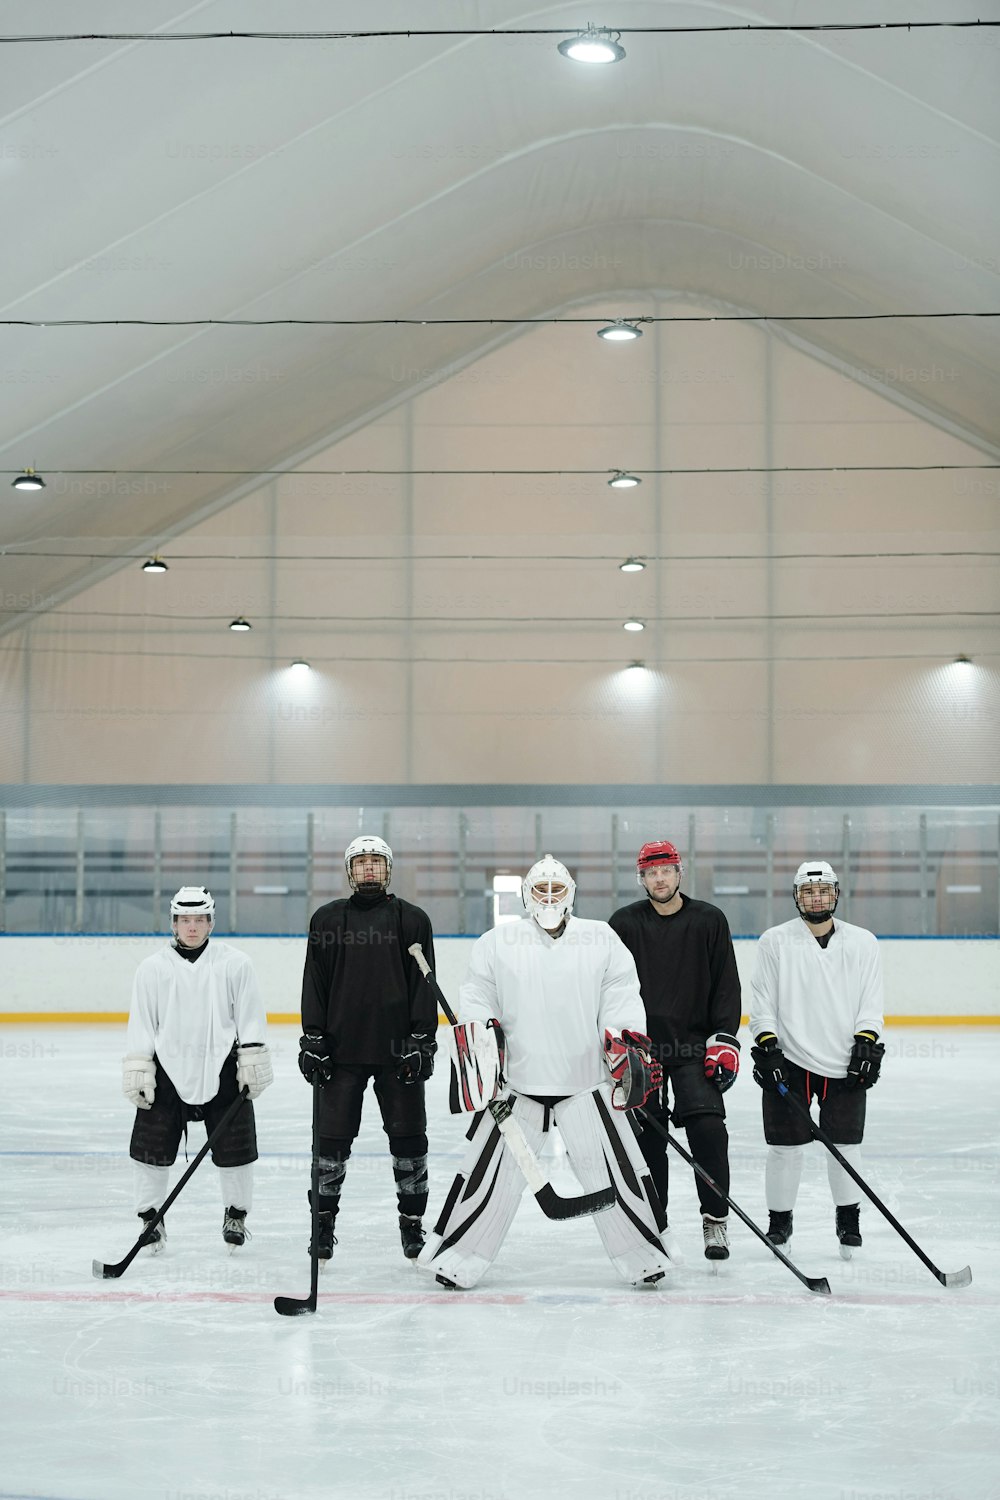 Group of hockey players and their trainer in sports uniform, gloves, skates and protective helmets standing on ice rink while waiting for play